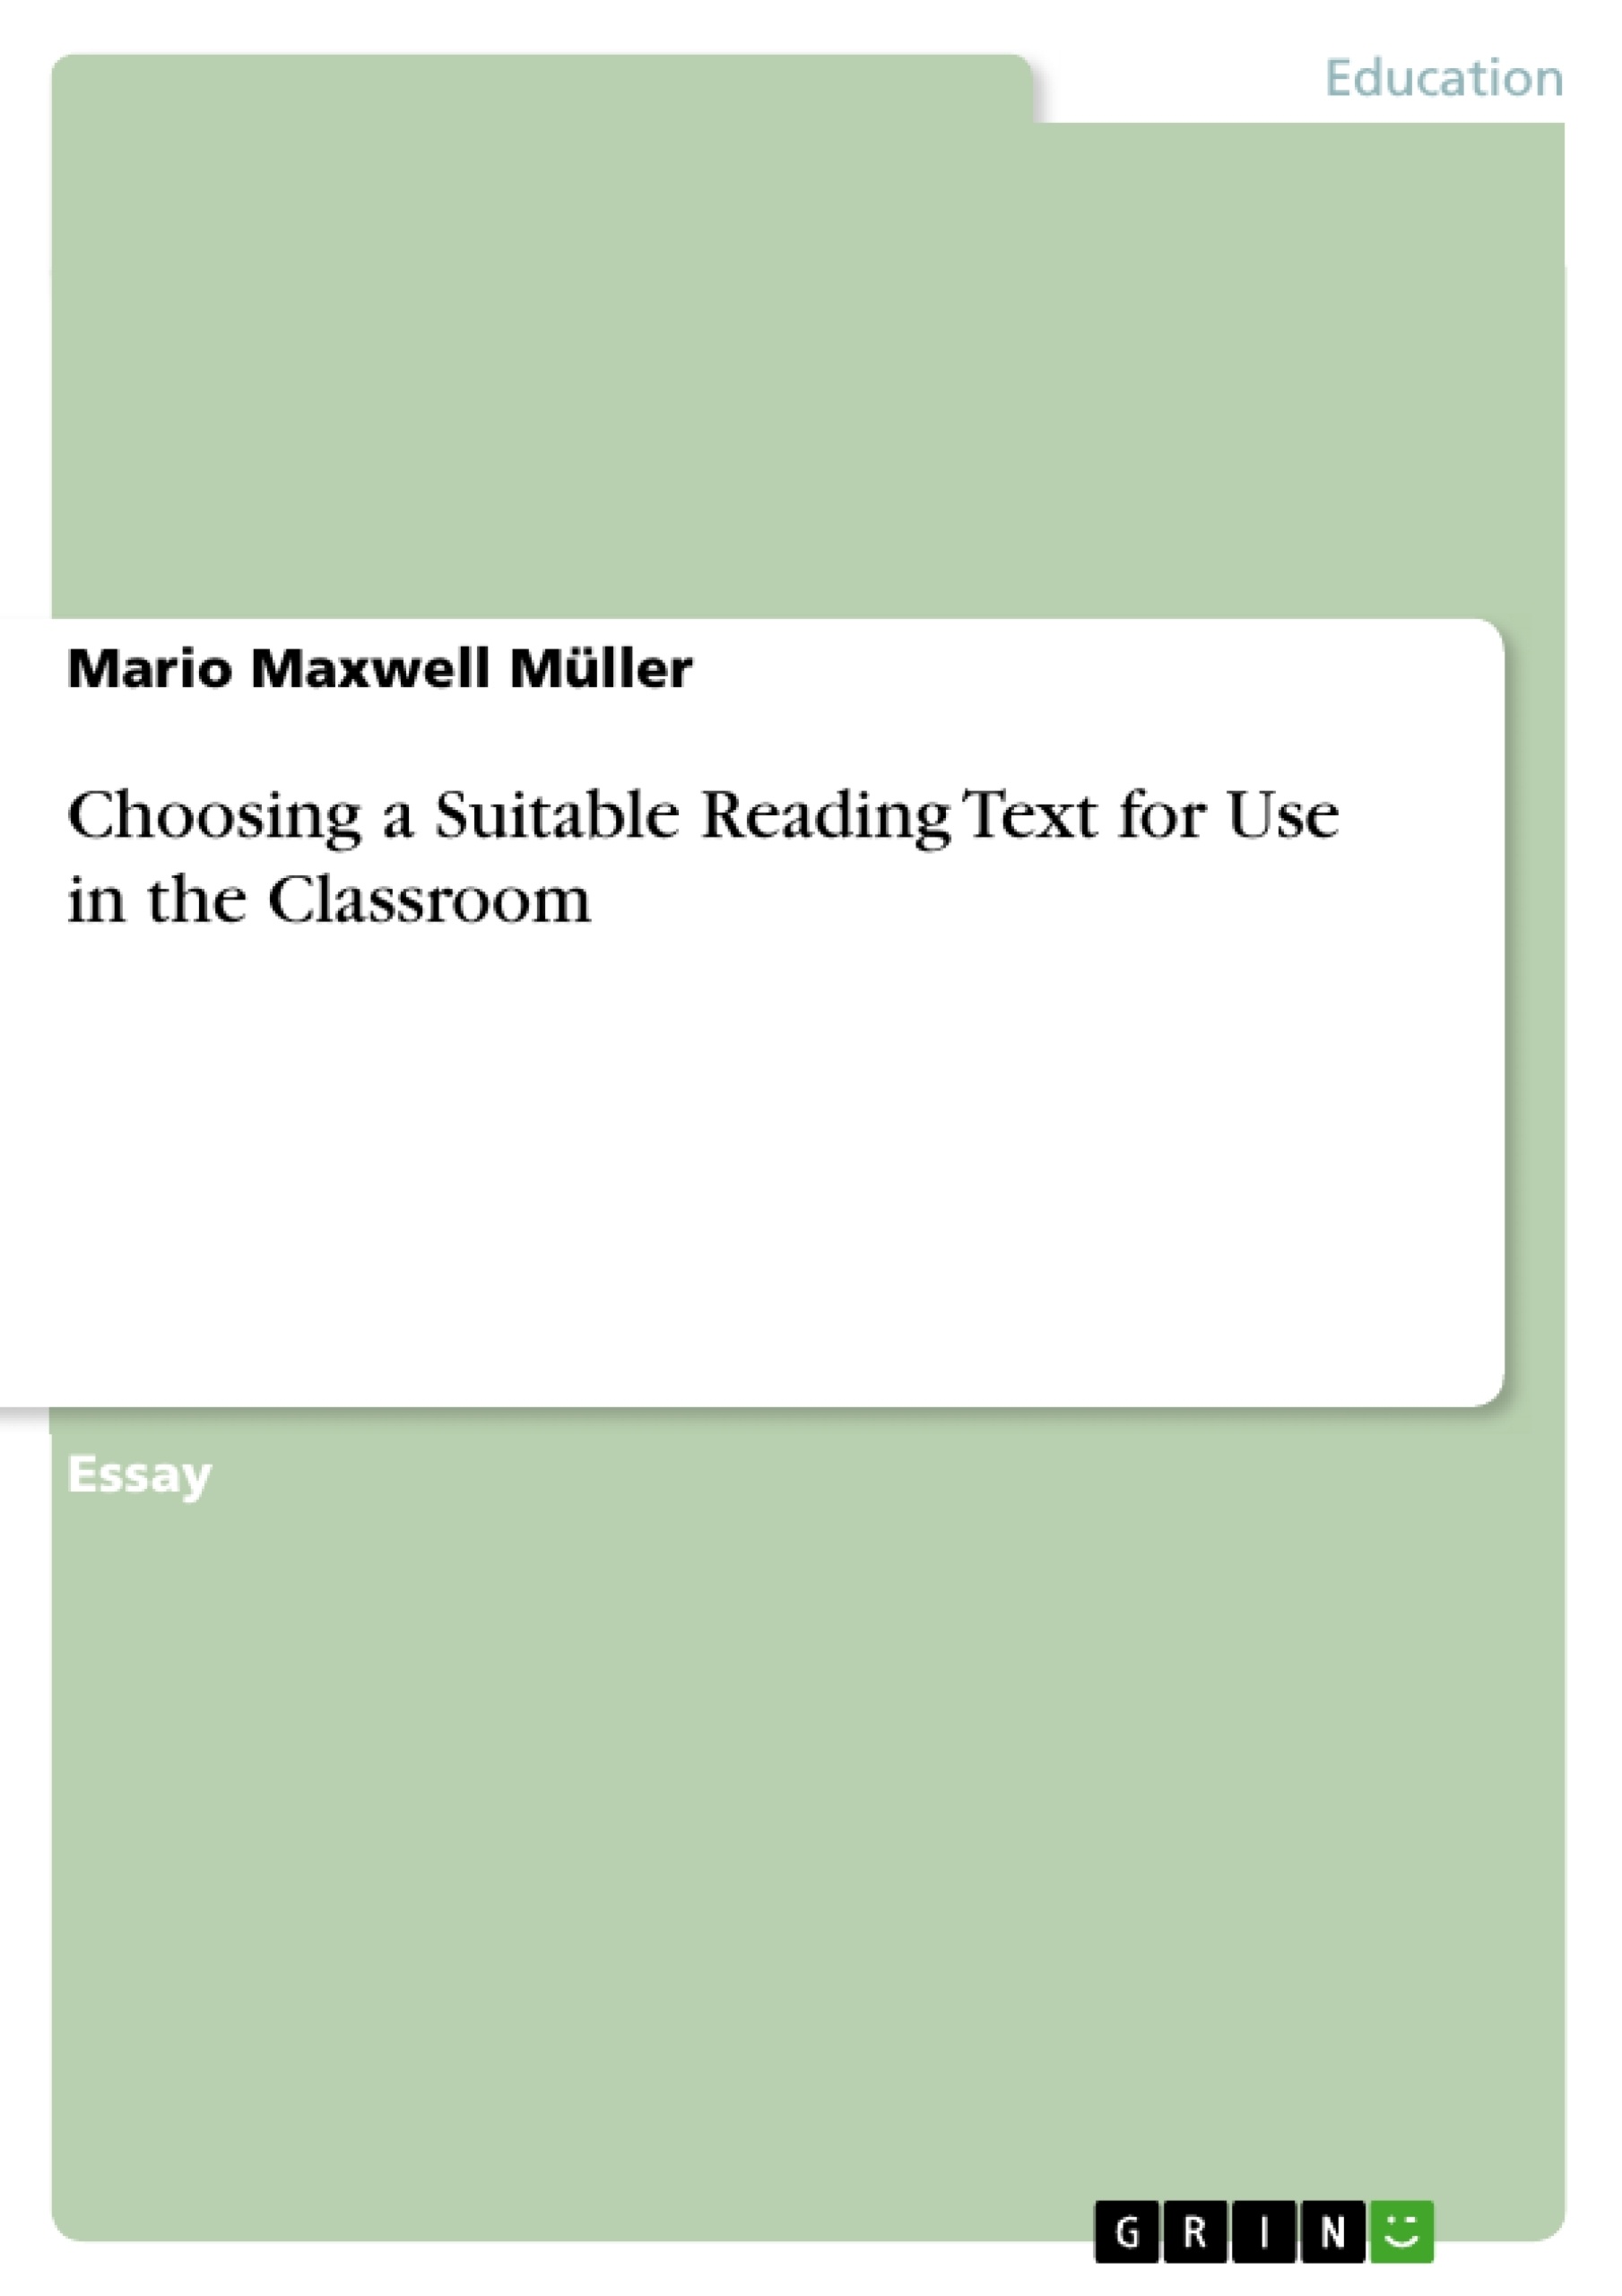 Title: Choosing a Suitable Reading Text for Use in the Classroom